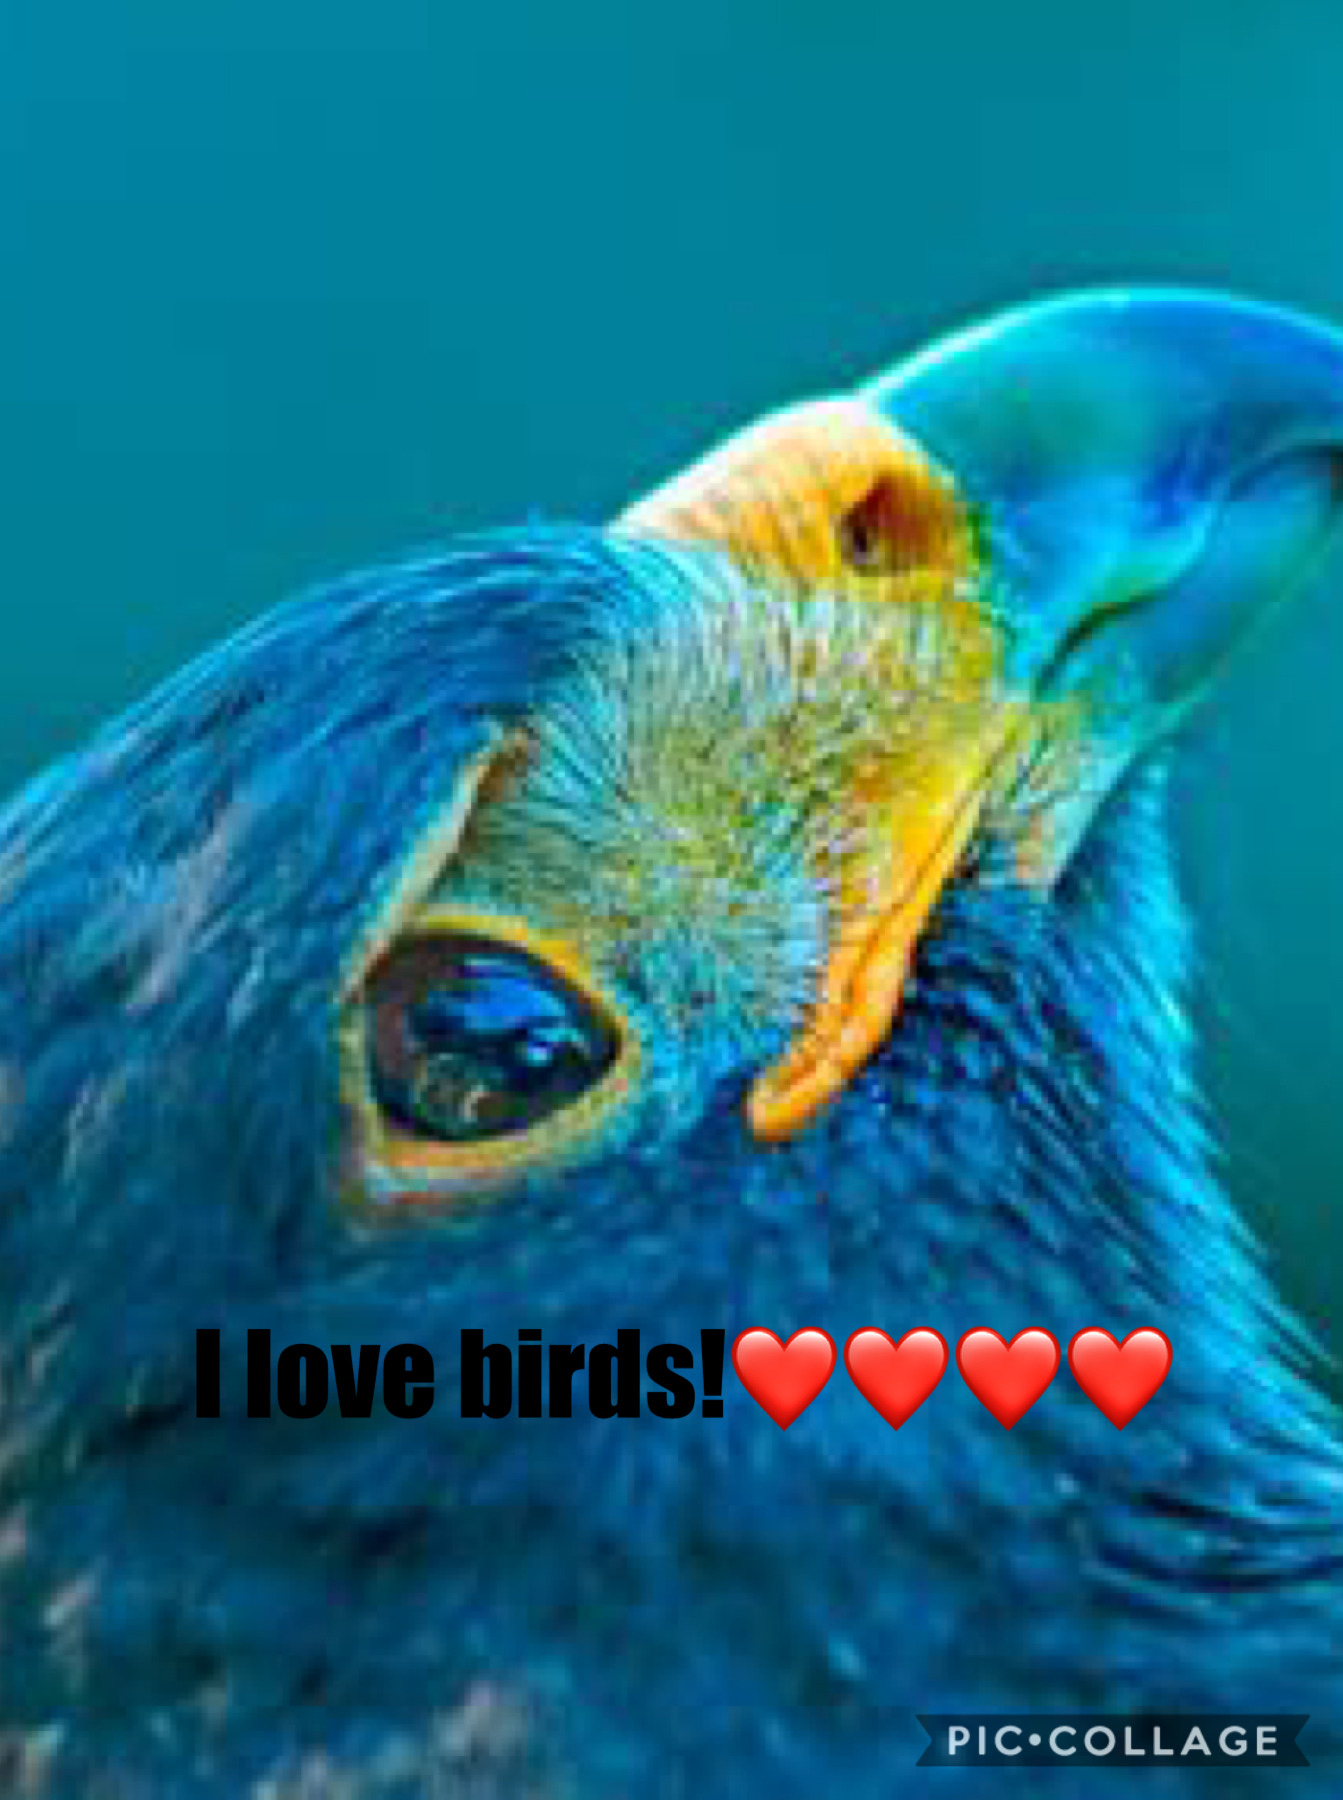 I LOVE birds!! What about you? Follow for a follow?